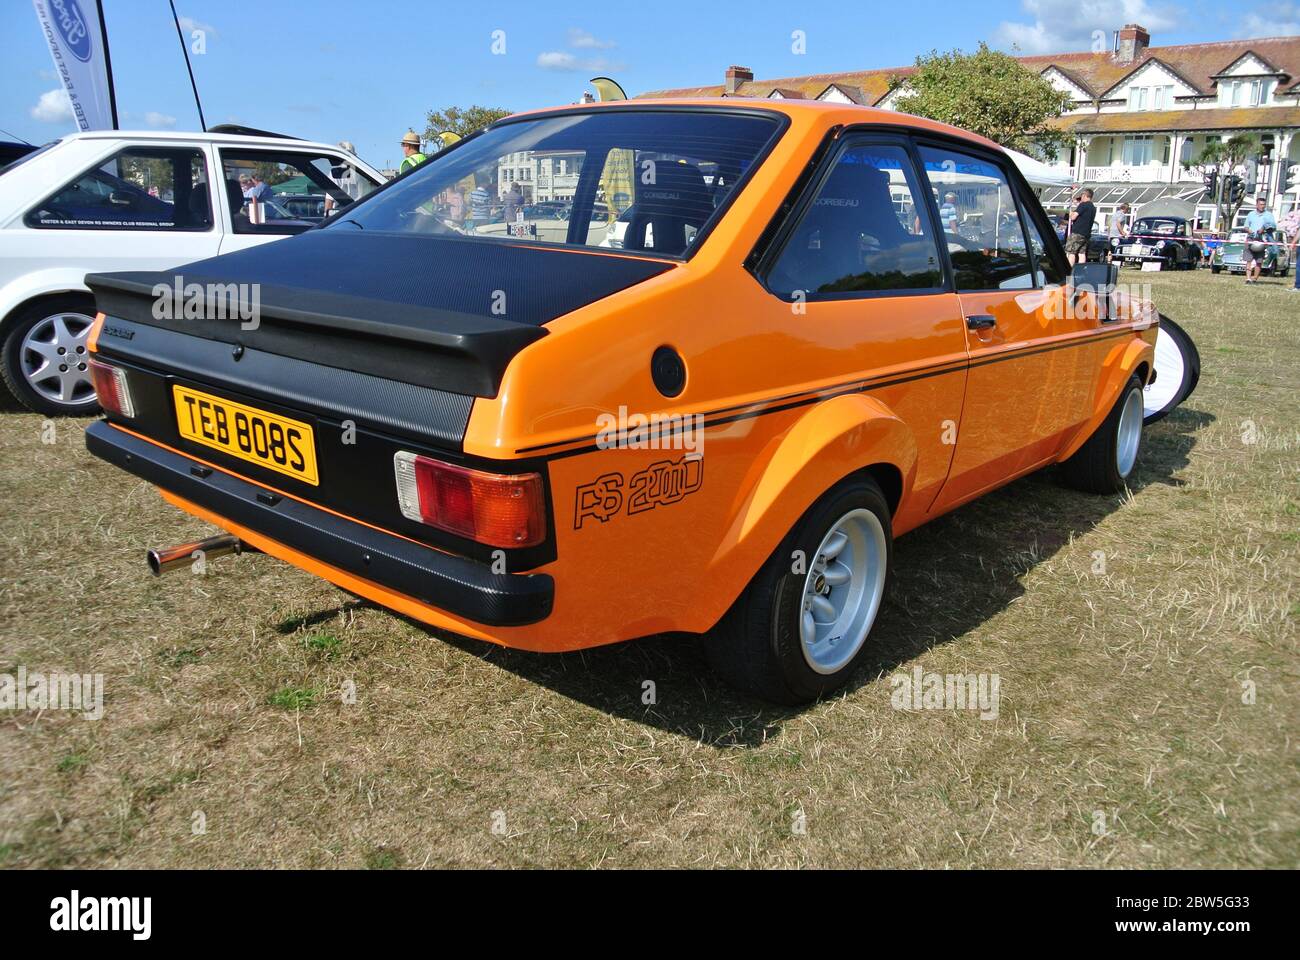 A 1978 Ford Escort Mk2 Rs 00 Parked Up On Display At The English Riviera Classic Car Show Paignton Devon England Uk Stock Photo Alamy